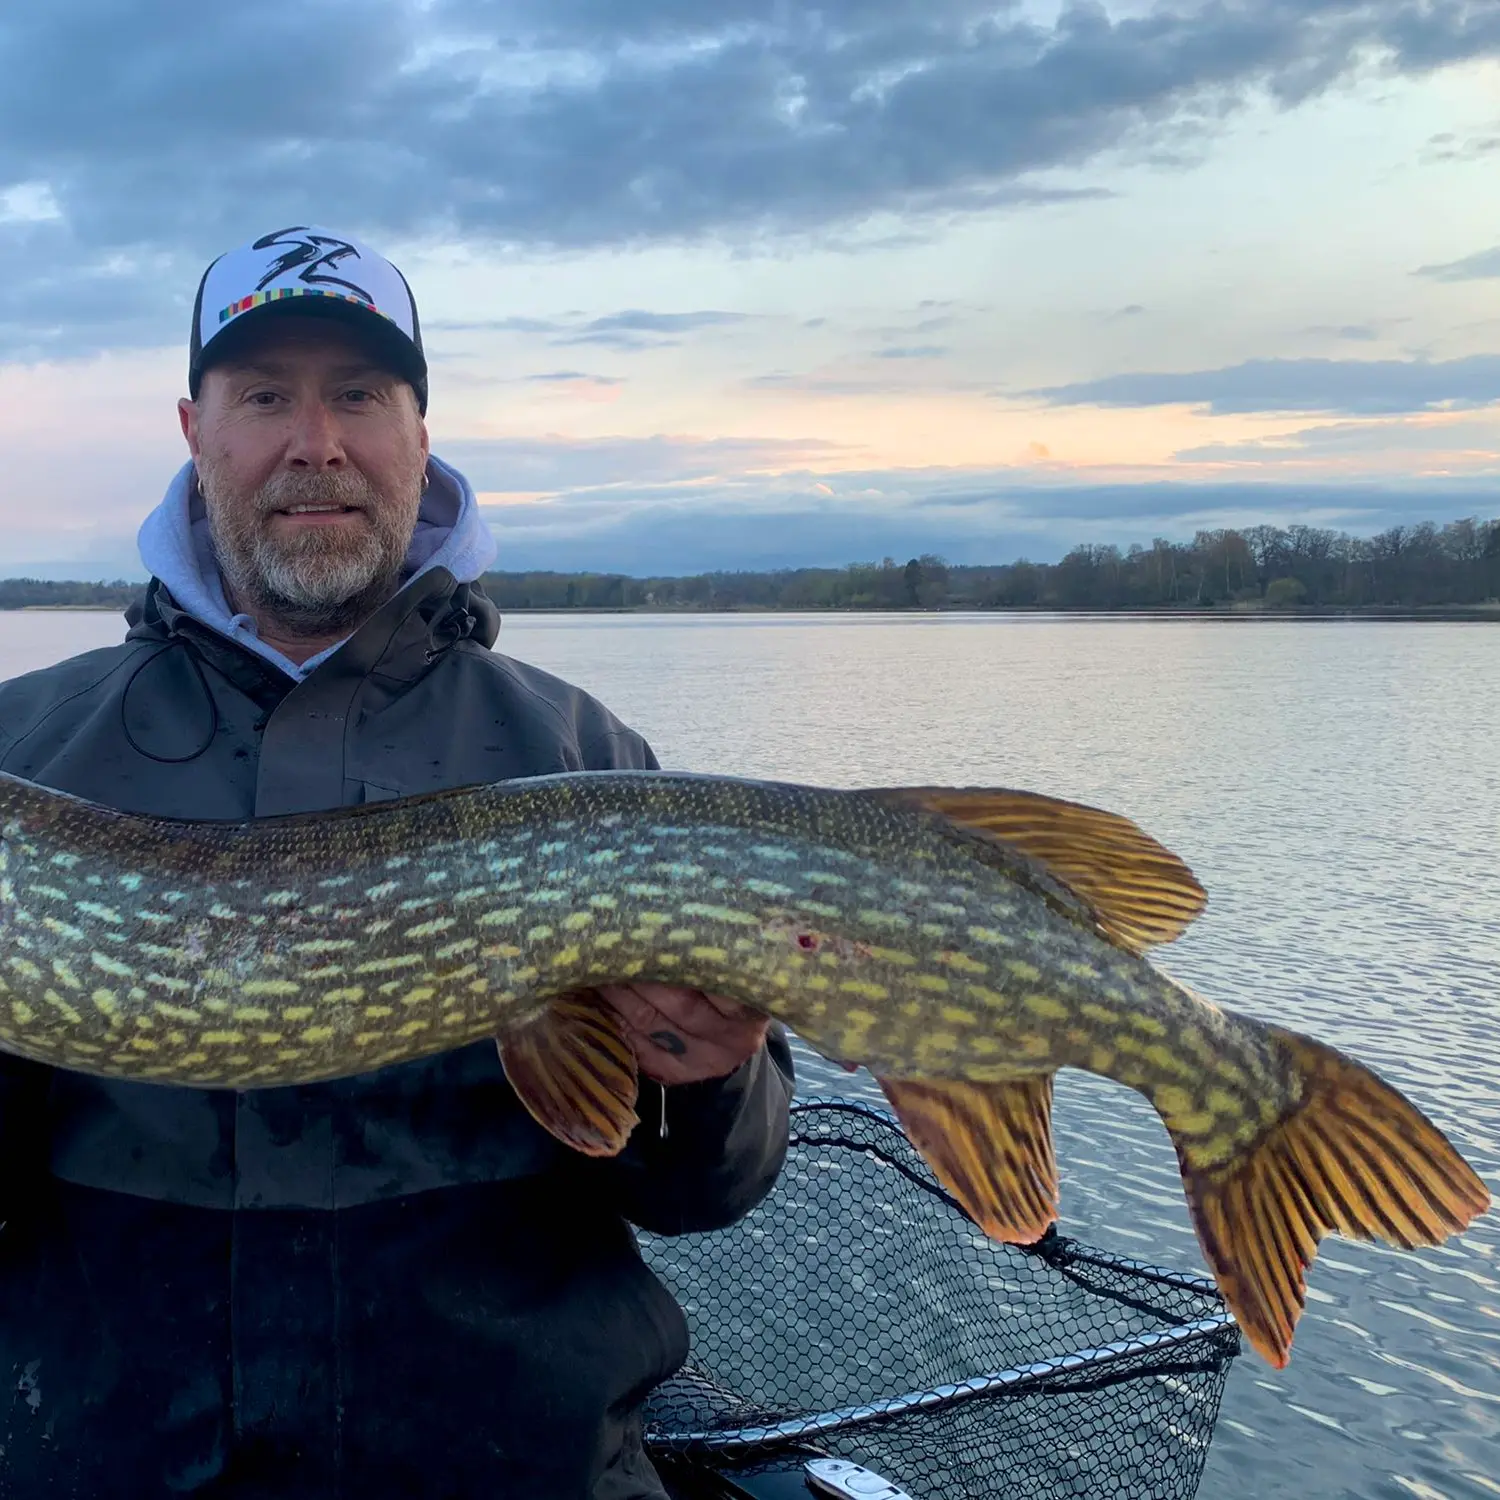 Fishing for Northern pike near you